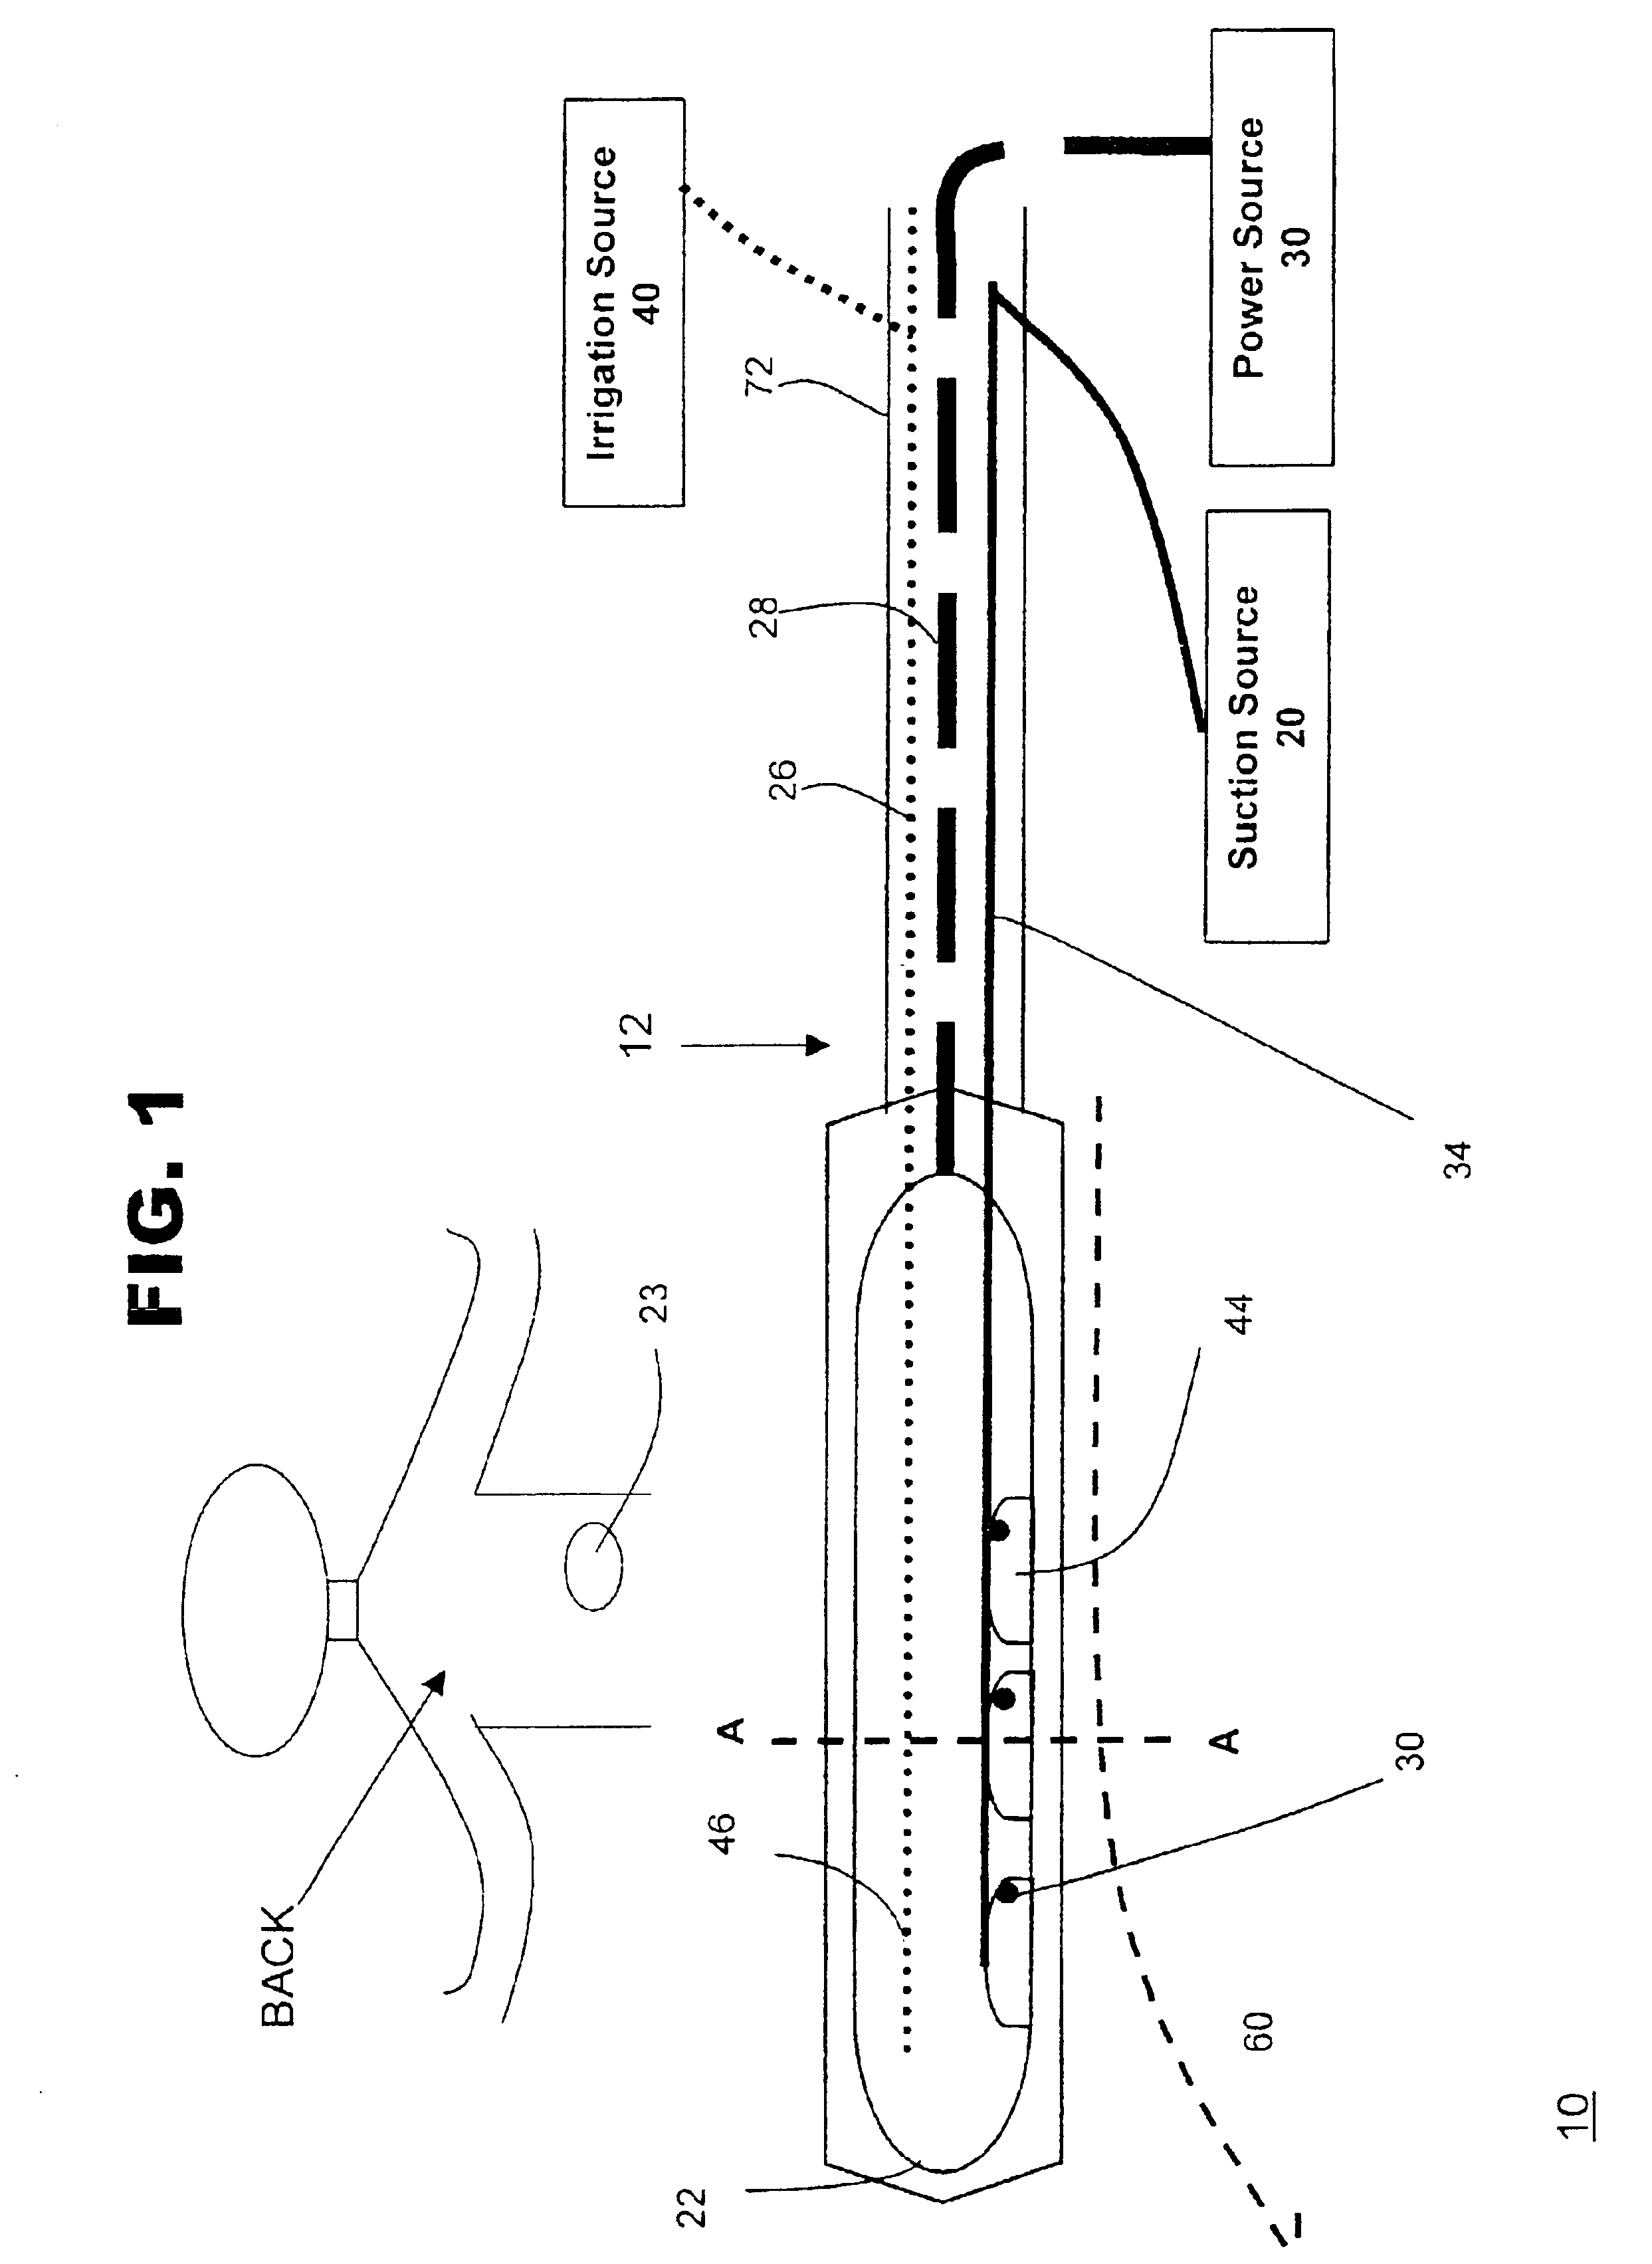 Suction stabilized epicardial ablation devices